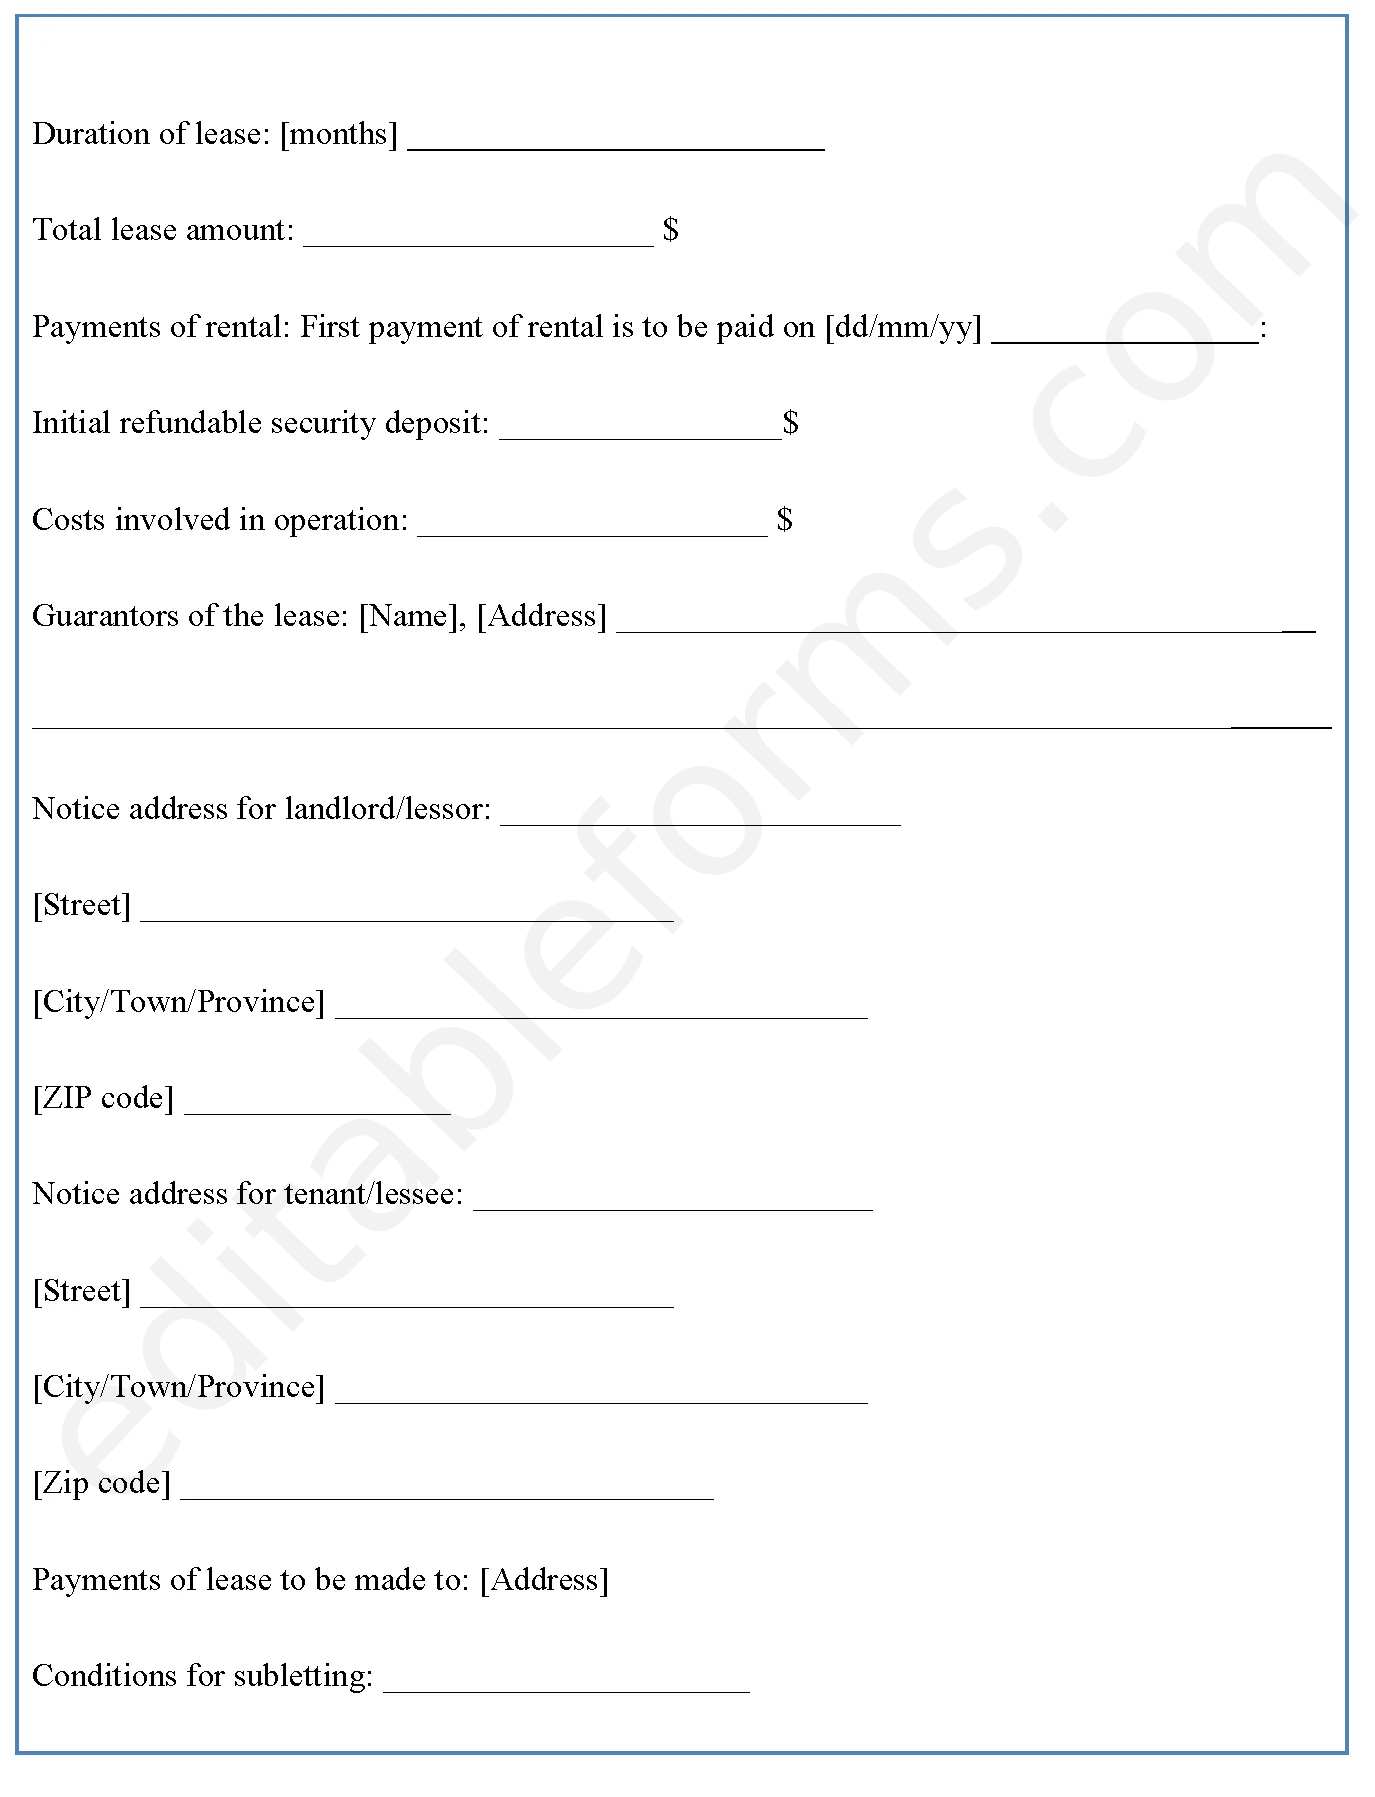 Lease Abstract Fillable PDF Template